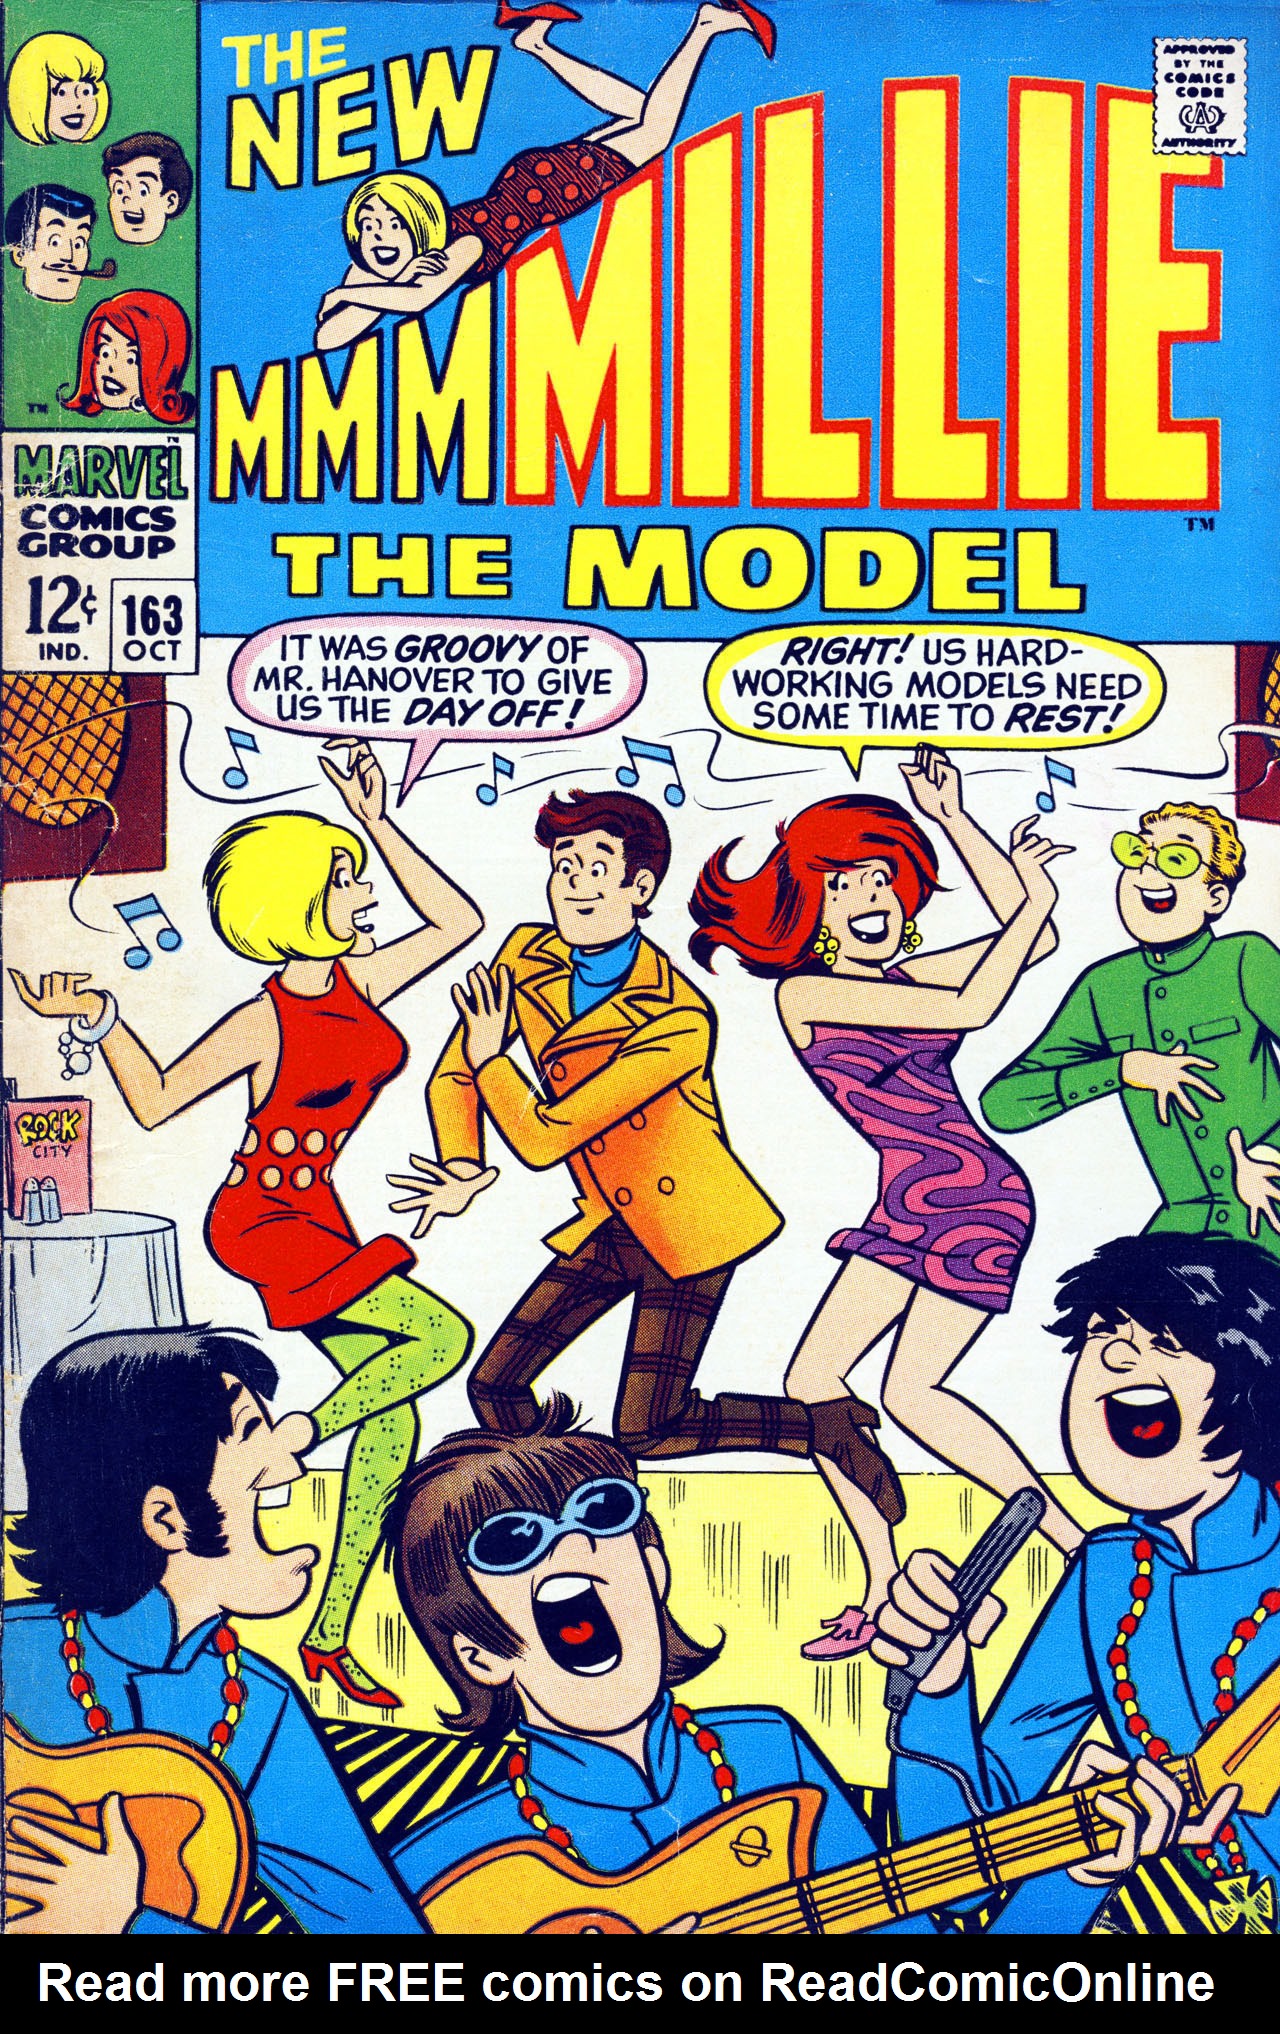 Read online Millie the Model comic -  Issue #163 - 1